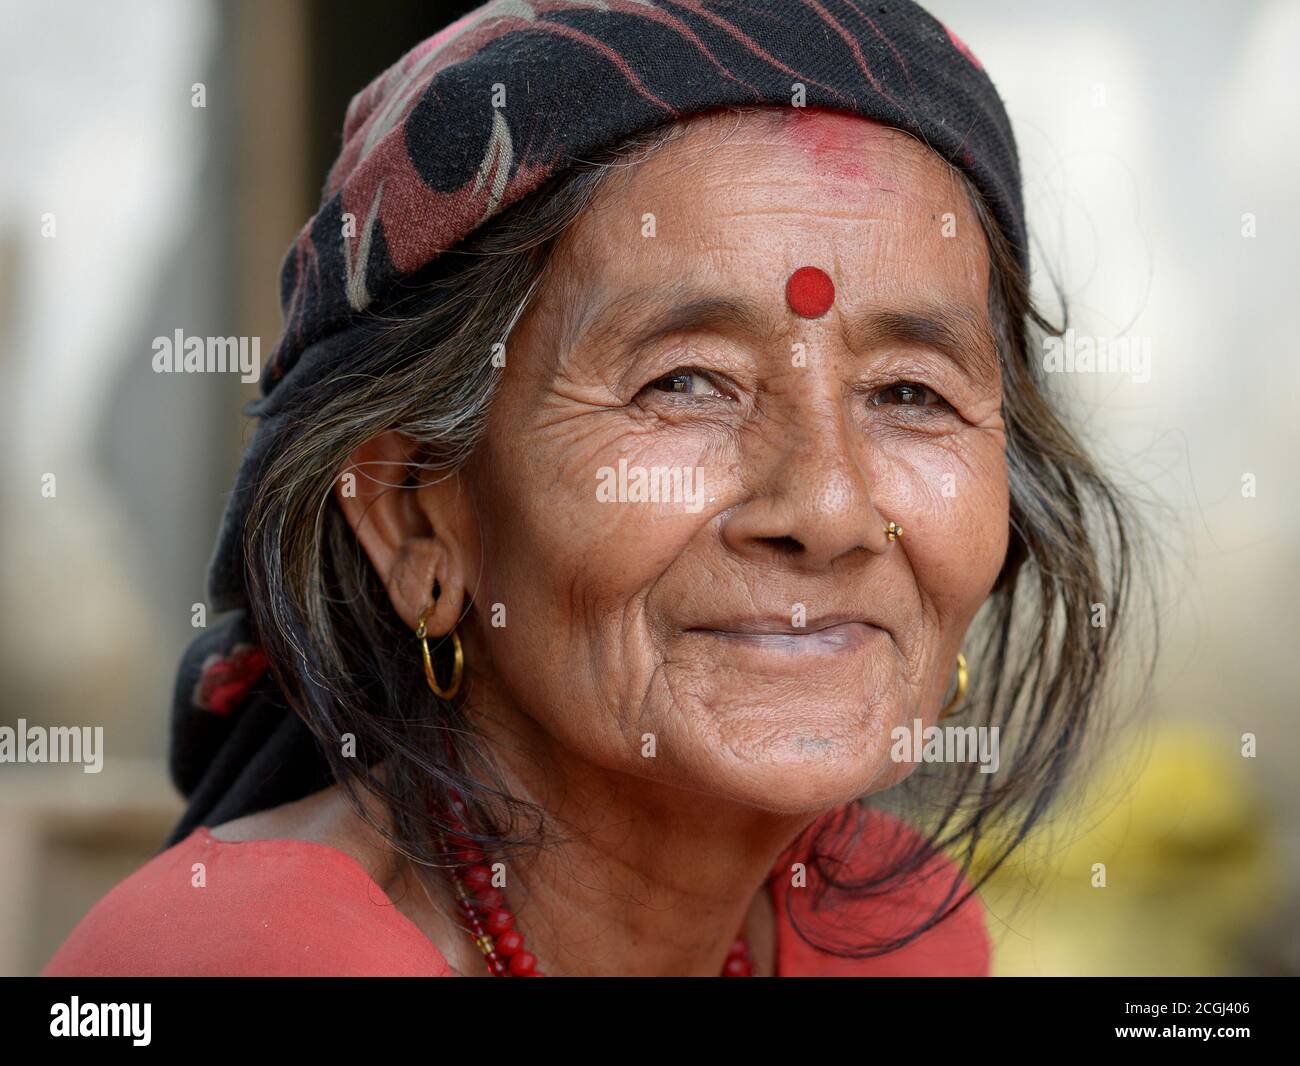 Closed-mouth smiling elderly Nepali Hindu woman with red bindi on her forehead poses for the camera. Stock Photo